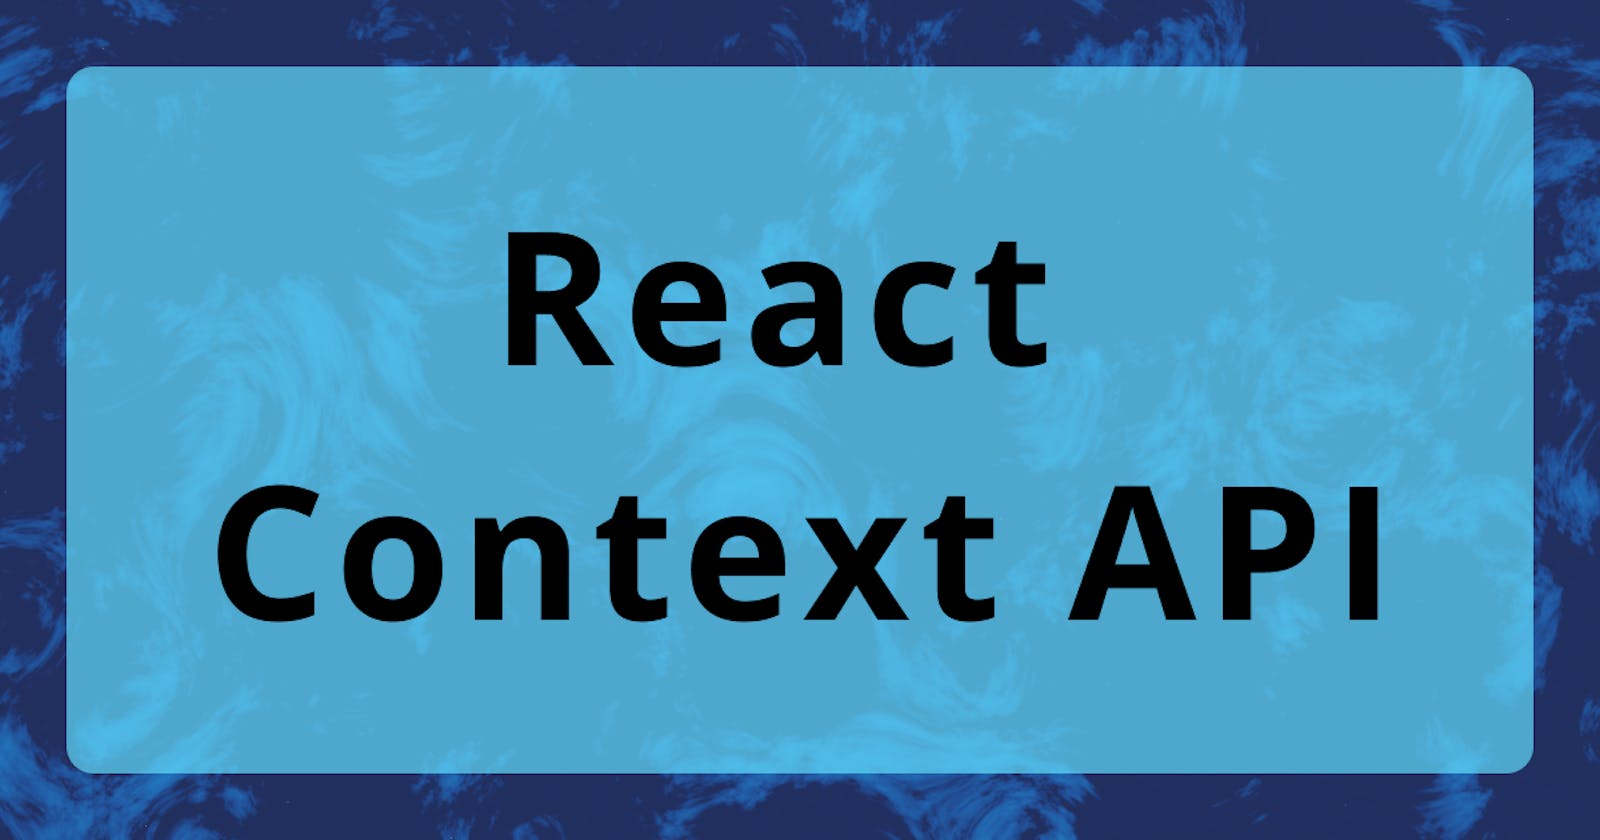 What have I learned about React Context API?